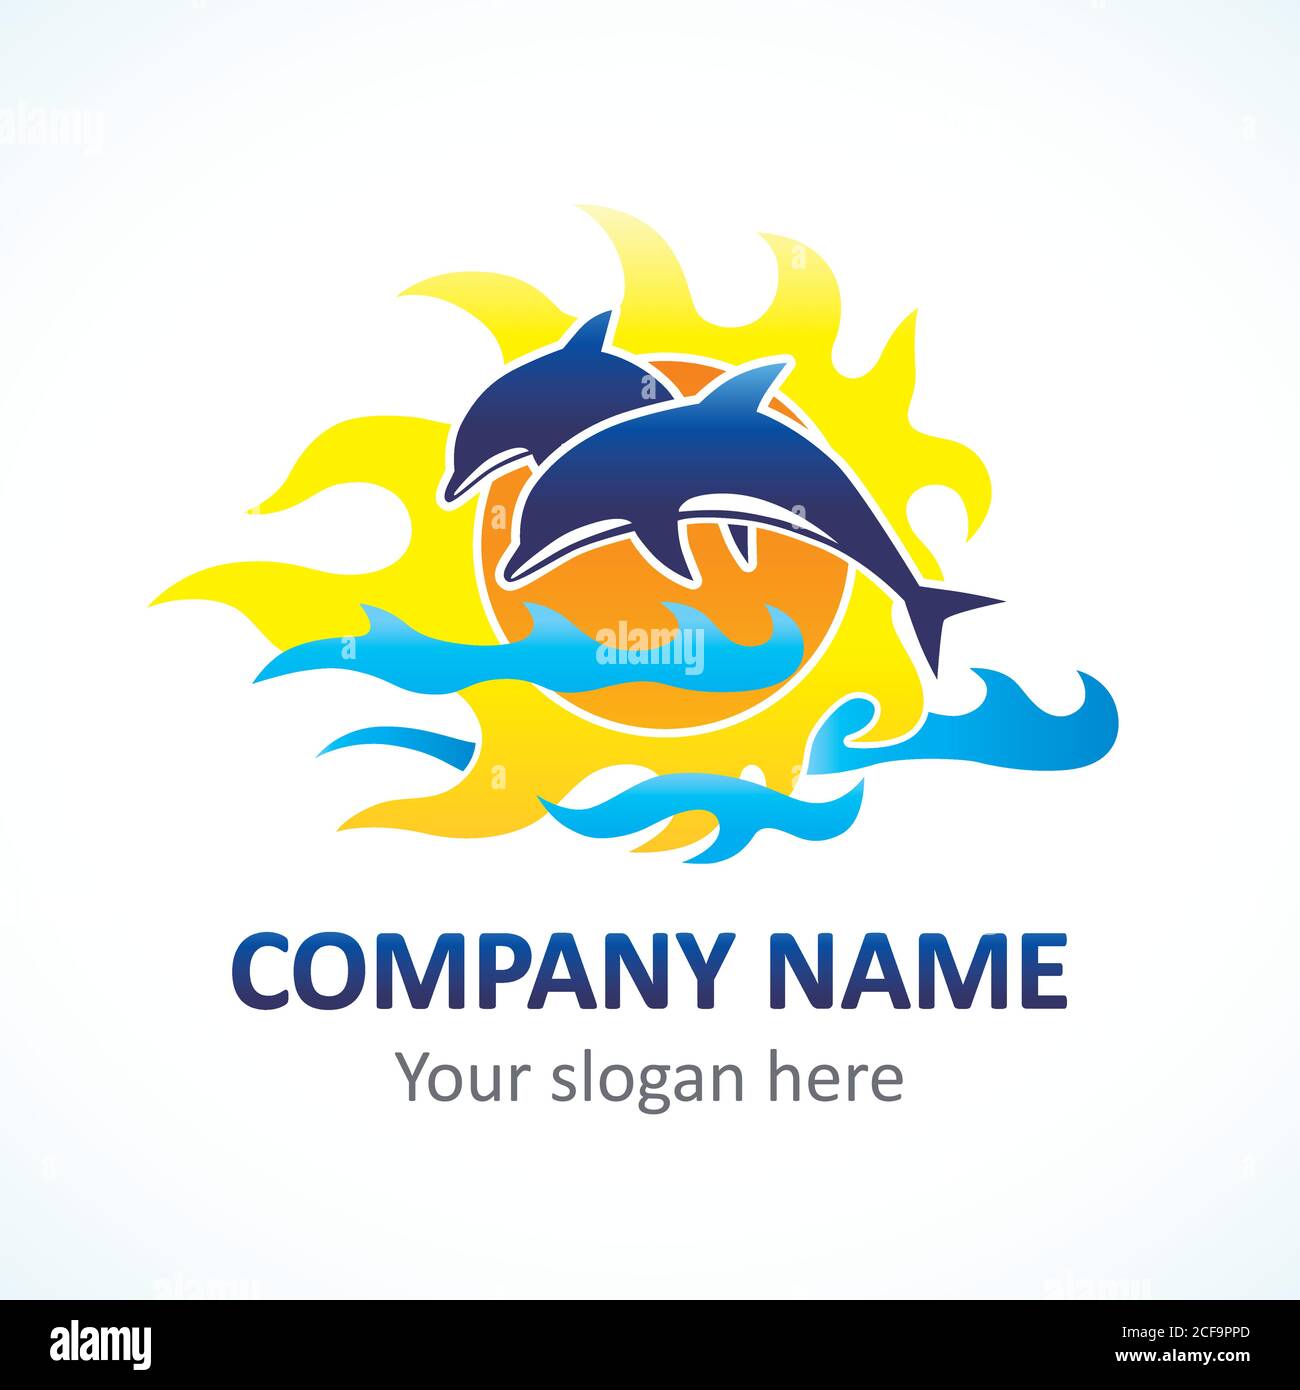 Dolphin, sea line and flame sunlight vector logo. Branding identity of tourist business, spa, beach service, resort or hotel by the sea Stock Vector